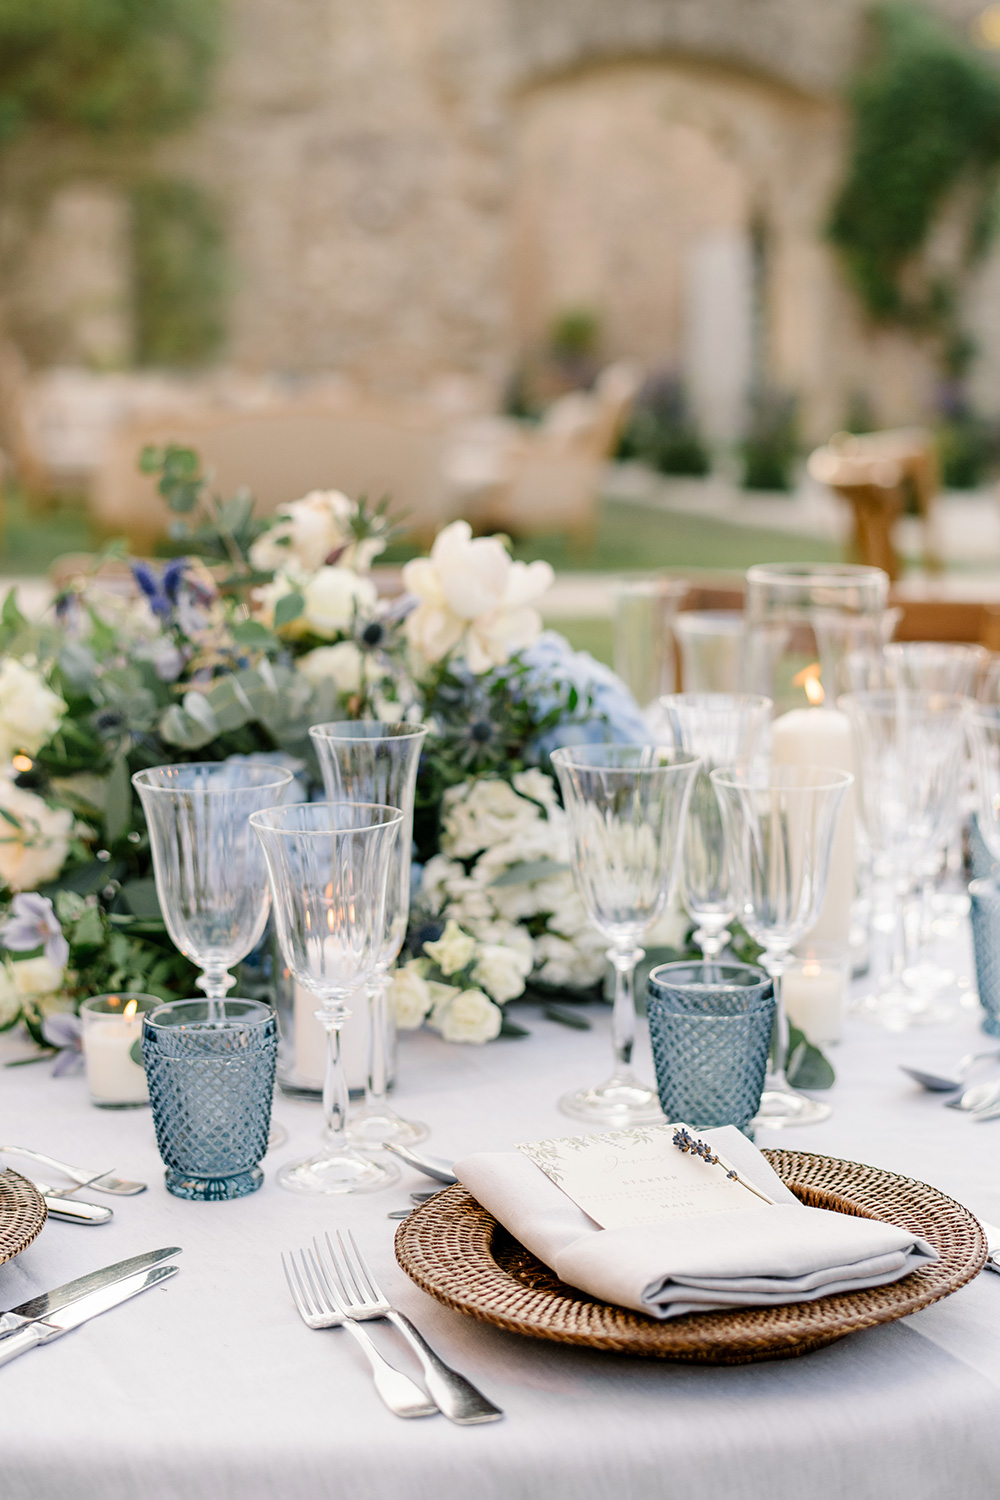 Wedding Table Setting with Blue Accents in Provence